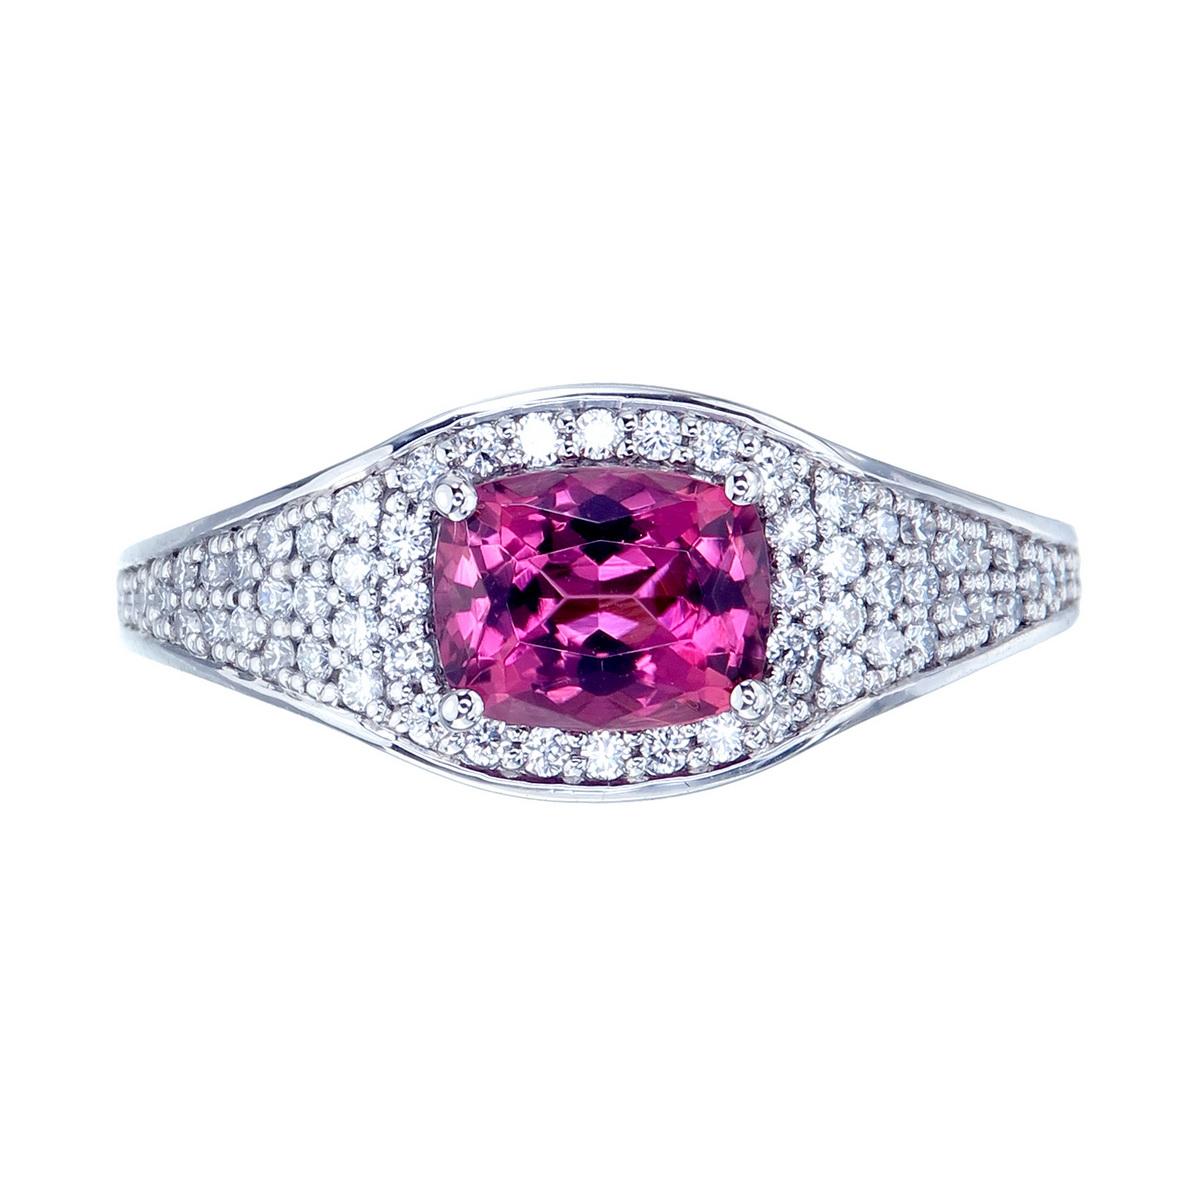 Contemporary Orloff of Denmark, GIA - 1.00 ct Vivid Pink Tourmaline Ring set in 950 Platinum For Sale